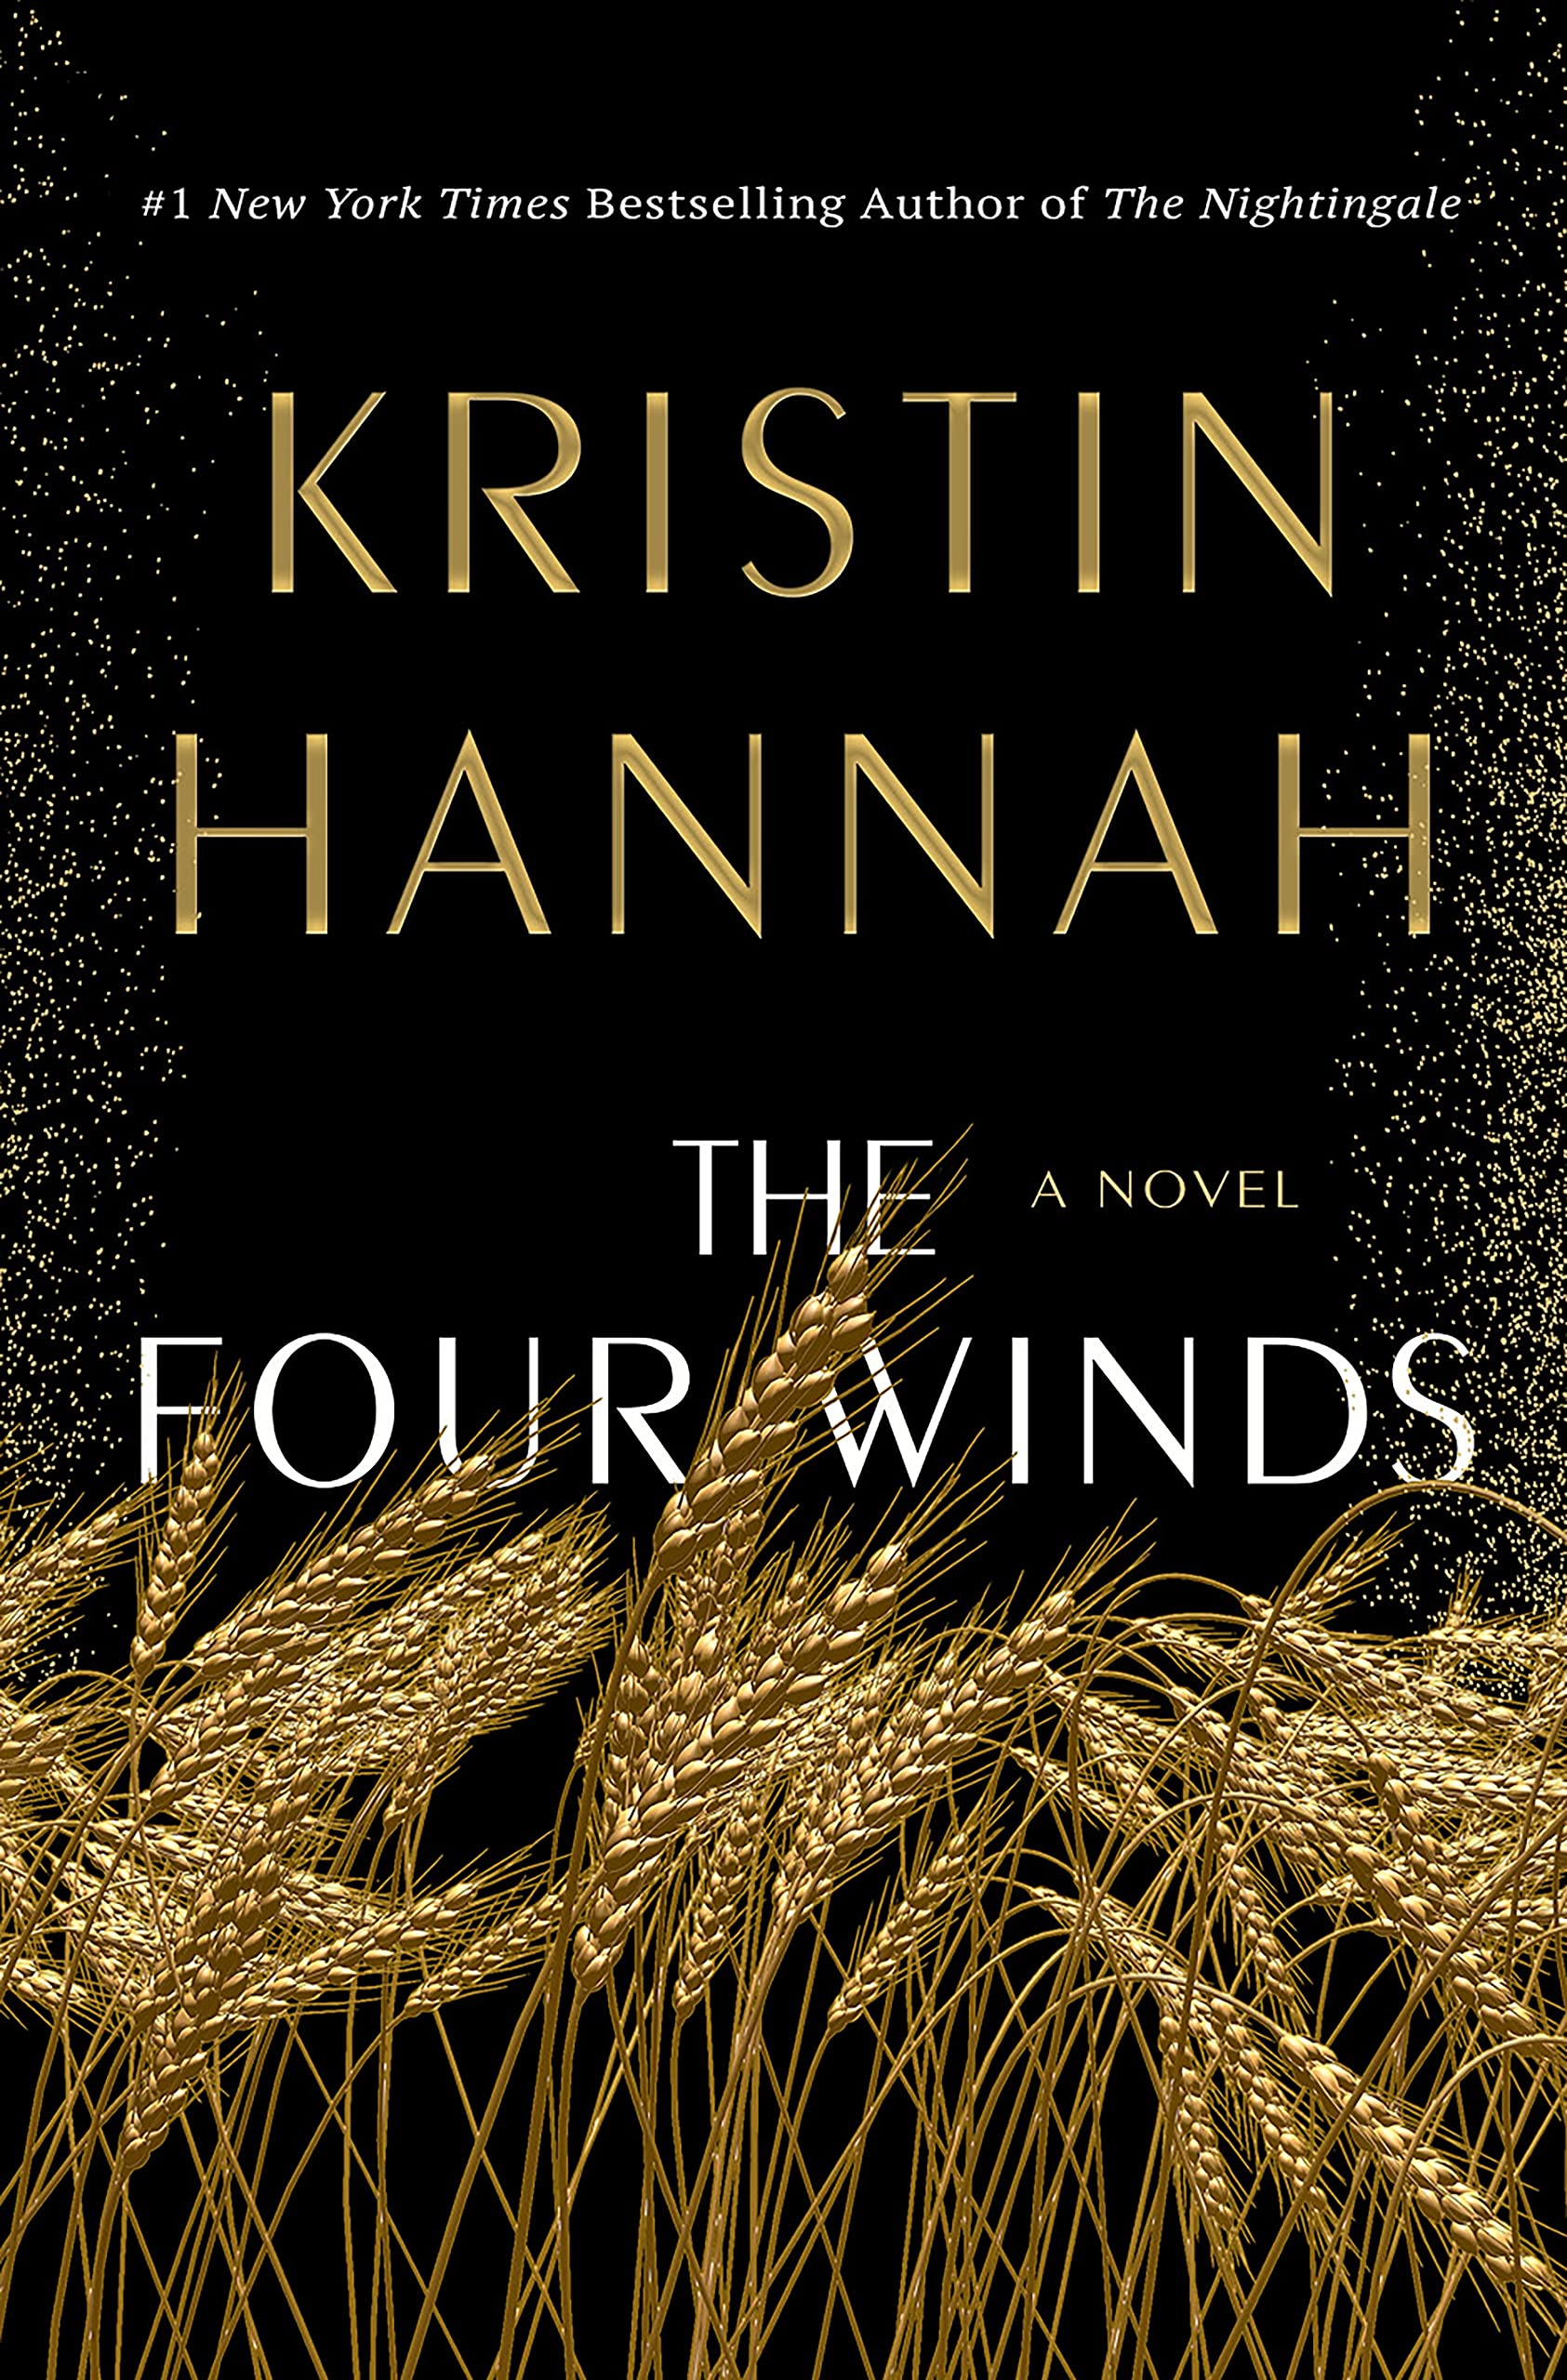 Picture of book cover of Four Winds by Kristin Hannah. Black cover with wheat stalks